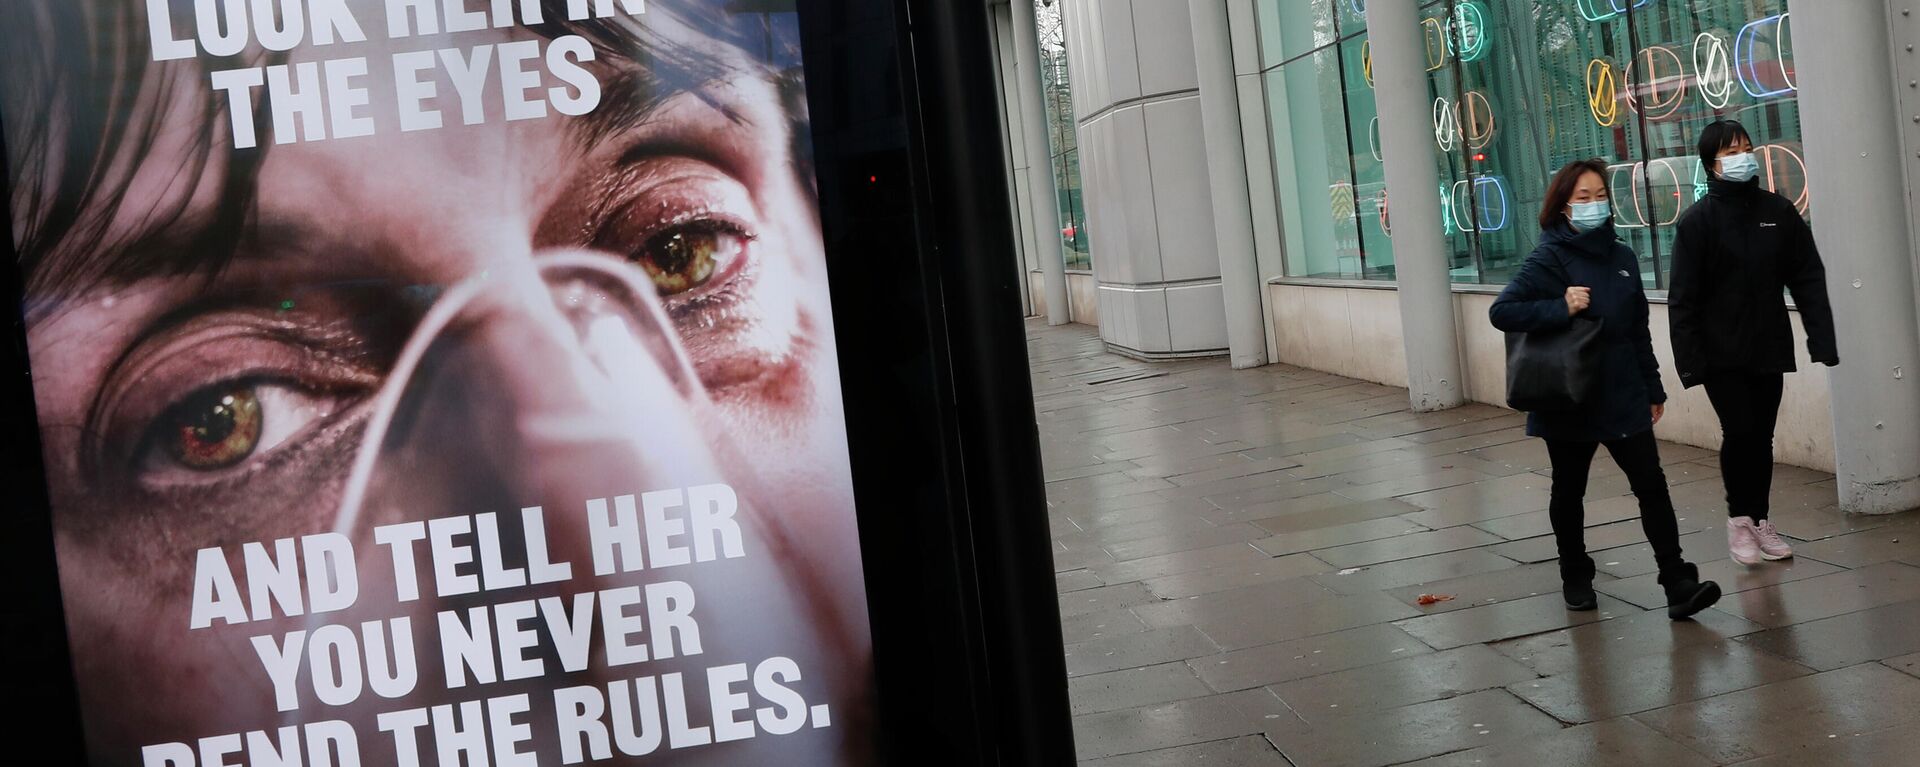 FILE - In this Feb. 2, 2021 file photo, pedestrians wearing masks against coronavirus walk past an NHS advertisement about COVID-19 in London, Tuesday, Feb. 2, 2021 - Sputnik International, 1920, 13.12.2021